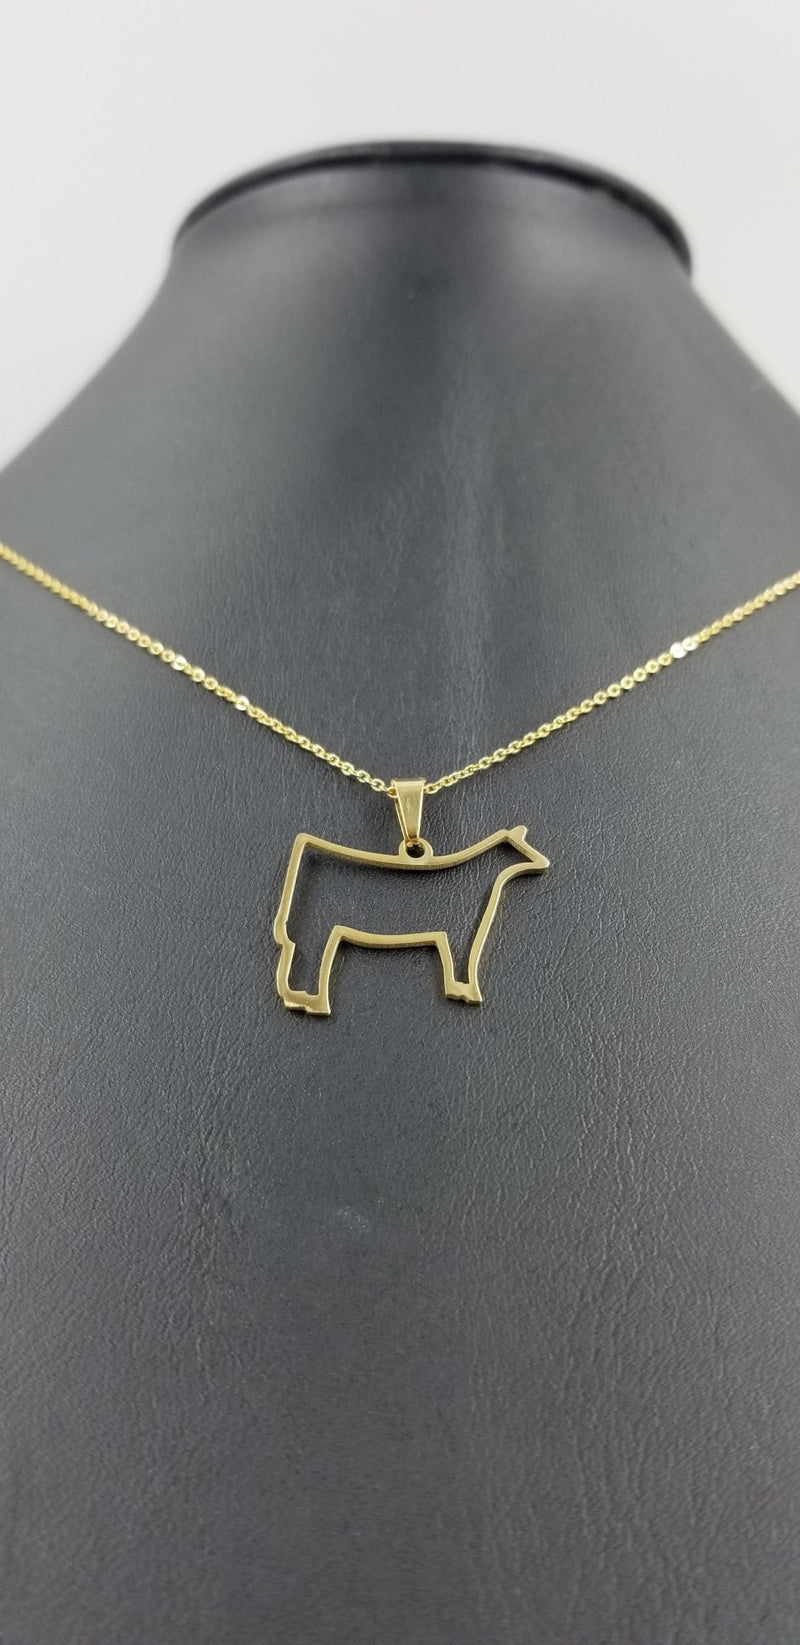 Stainless Steel Show Heifer Outline Necklace and Earring Set - The Branded Barn